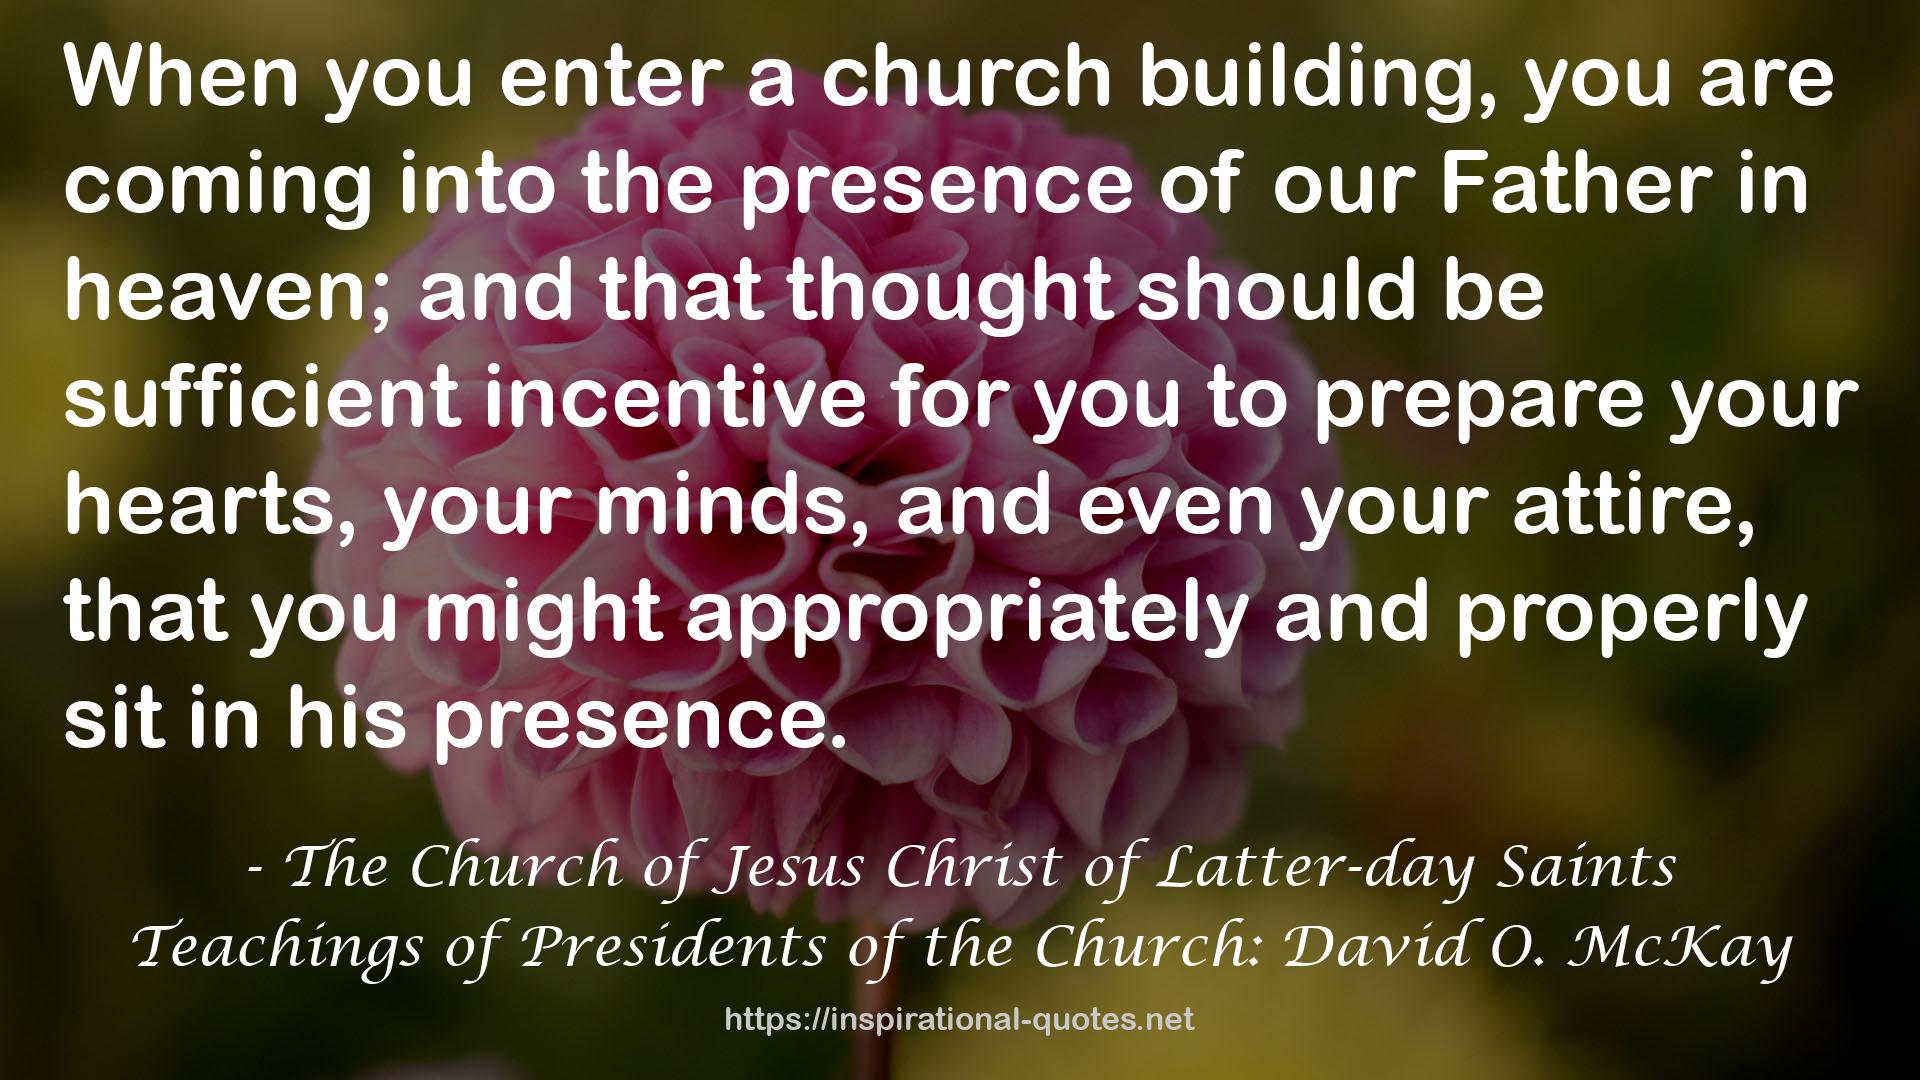 Teachings of Presidents of the Church: David O. McKay QUOTES